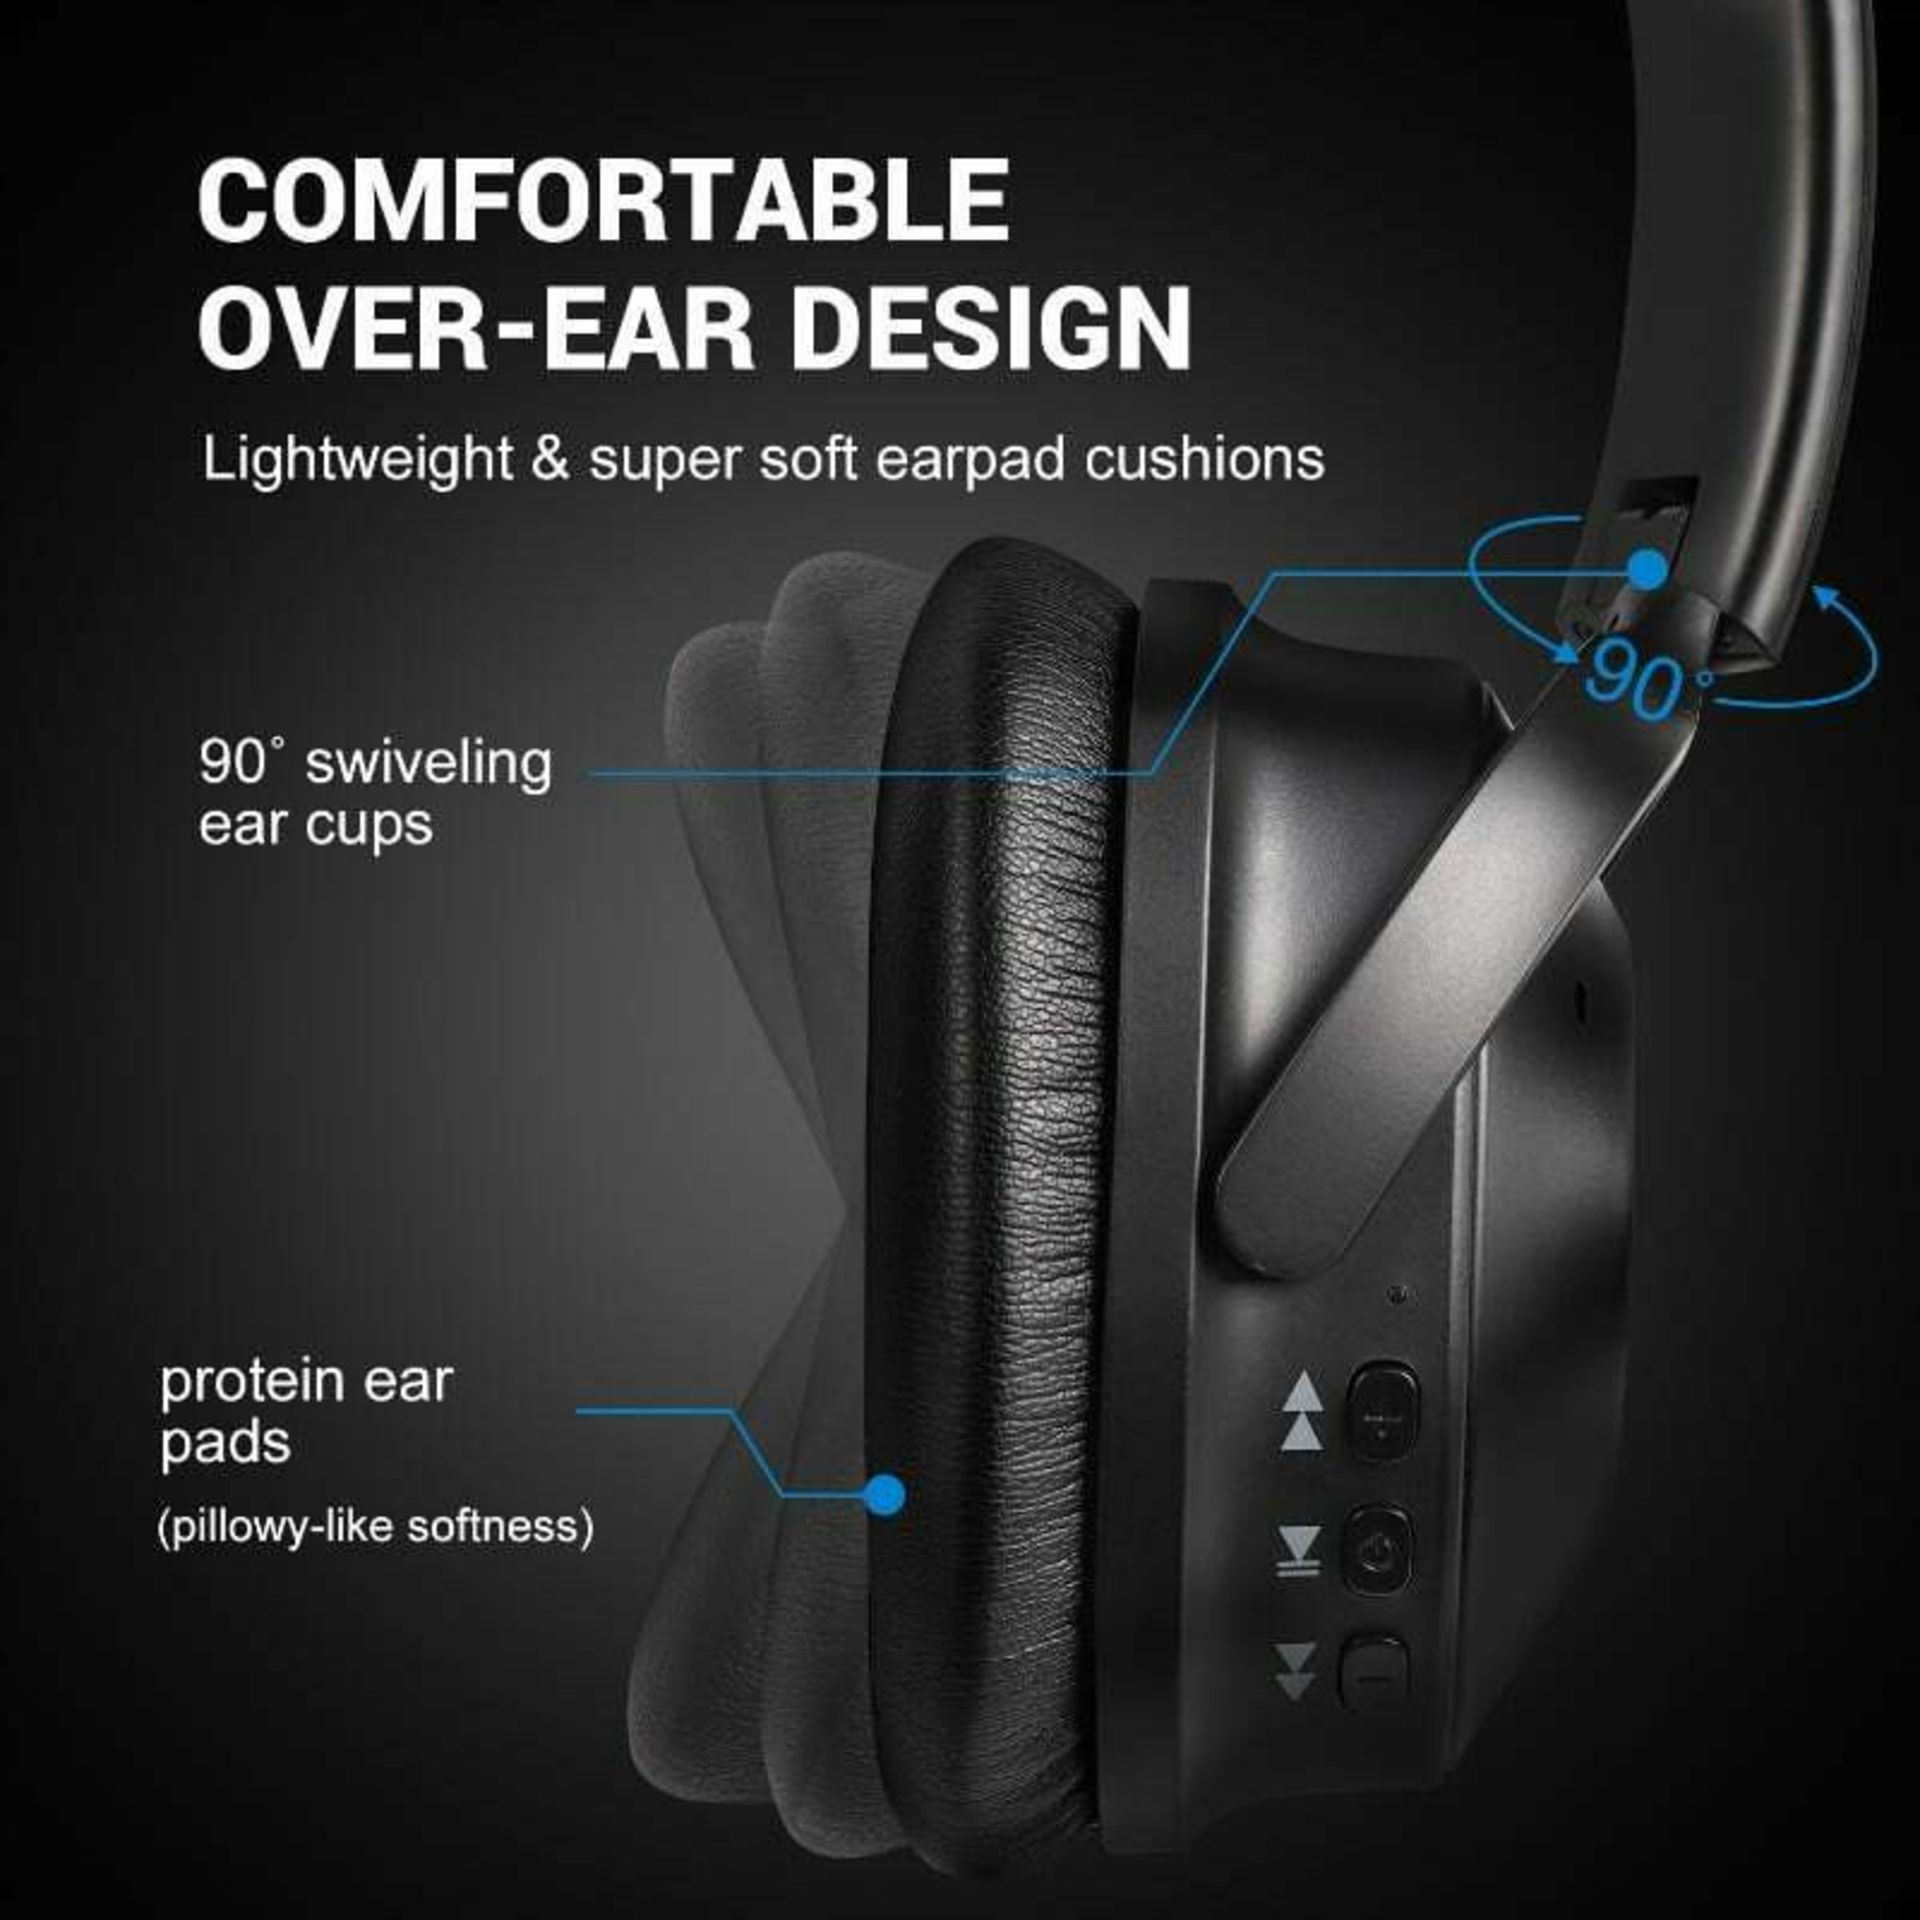 Oneaudio A9 Traveller ANC Bluetooth Headphones - Image 2 of 9